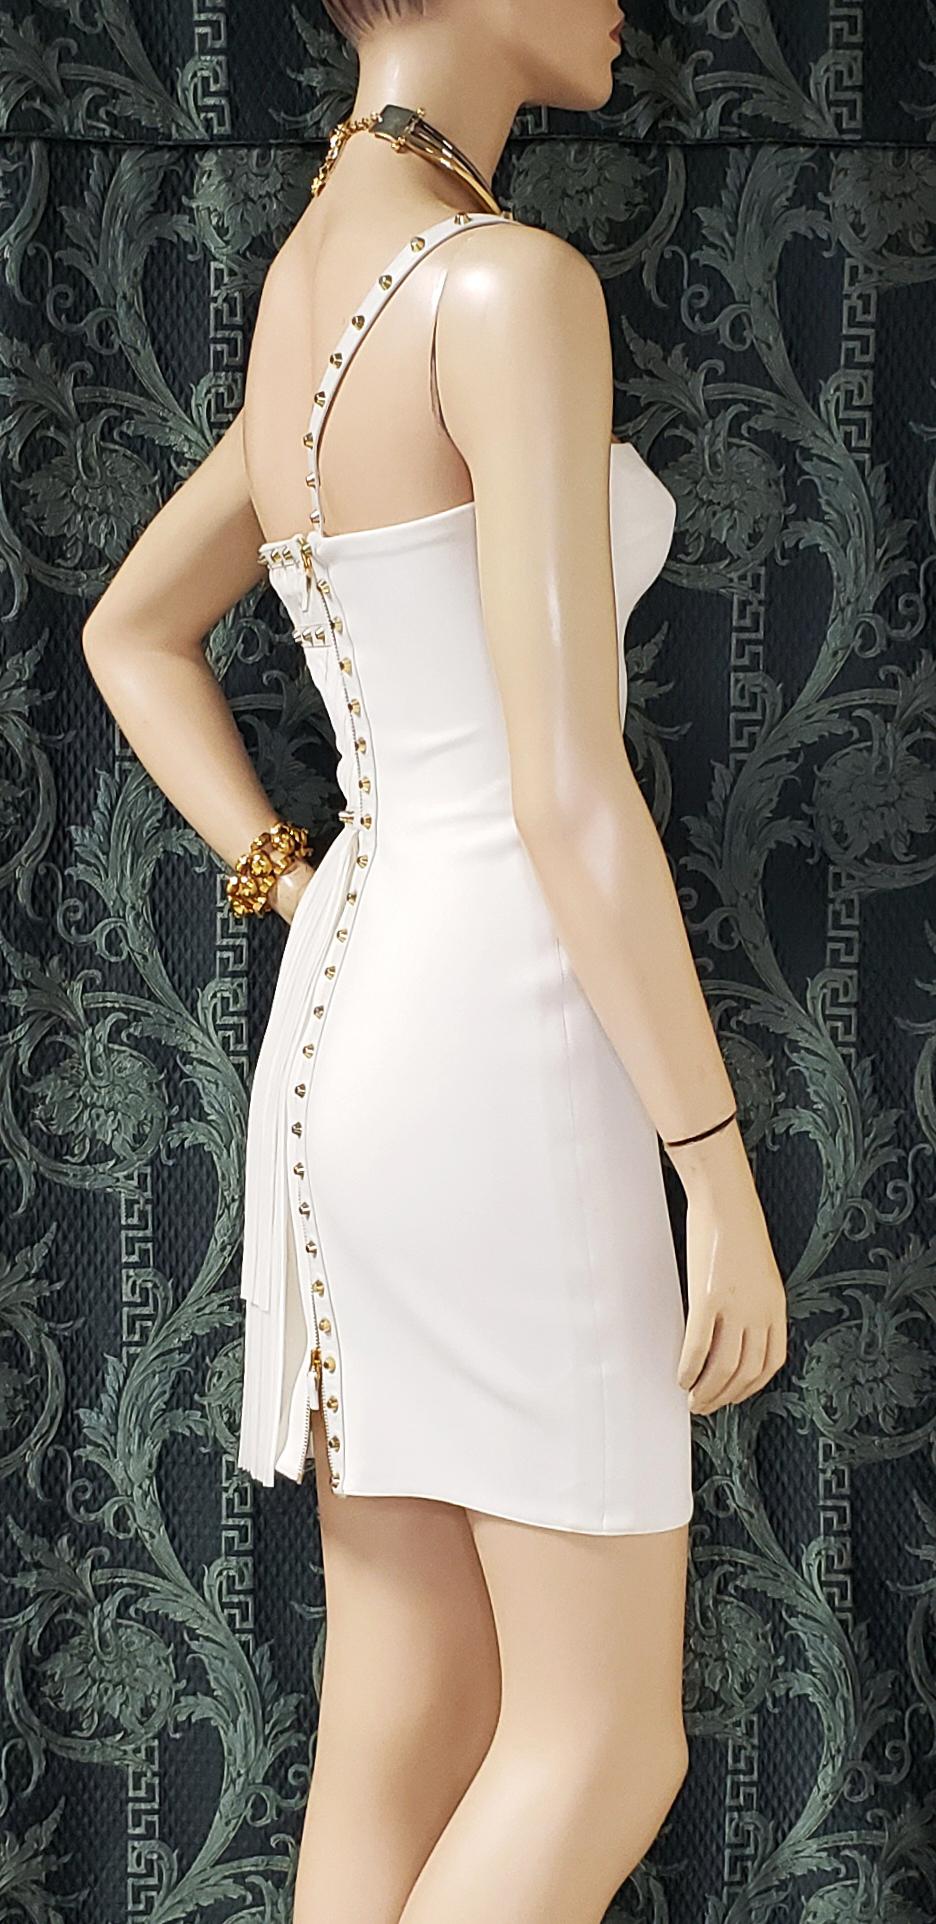 S/S 2012 look # 35 NEW VERSACE ONE SHOULDER WHITE STUDDED DRESS 38 - 2 5